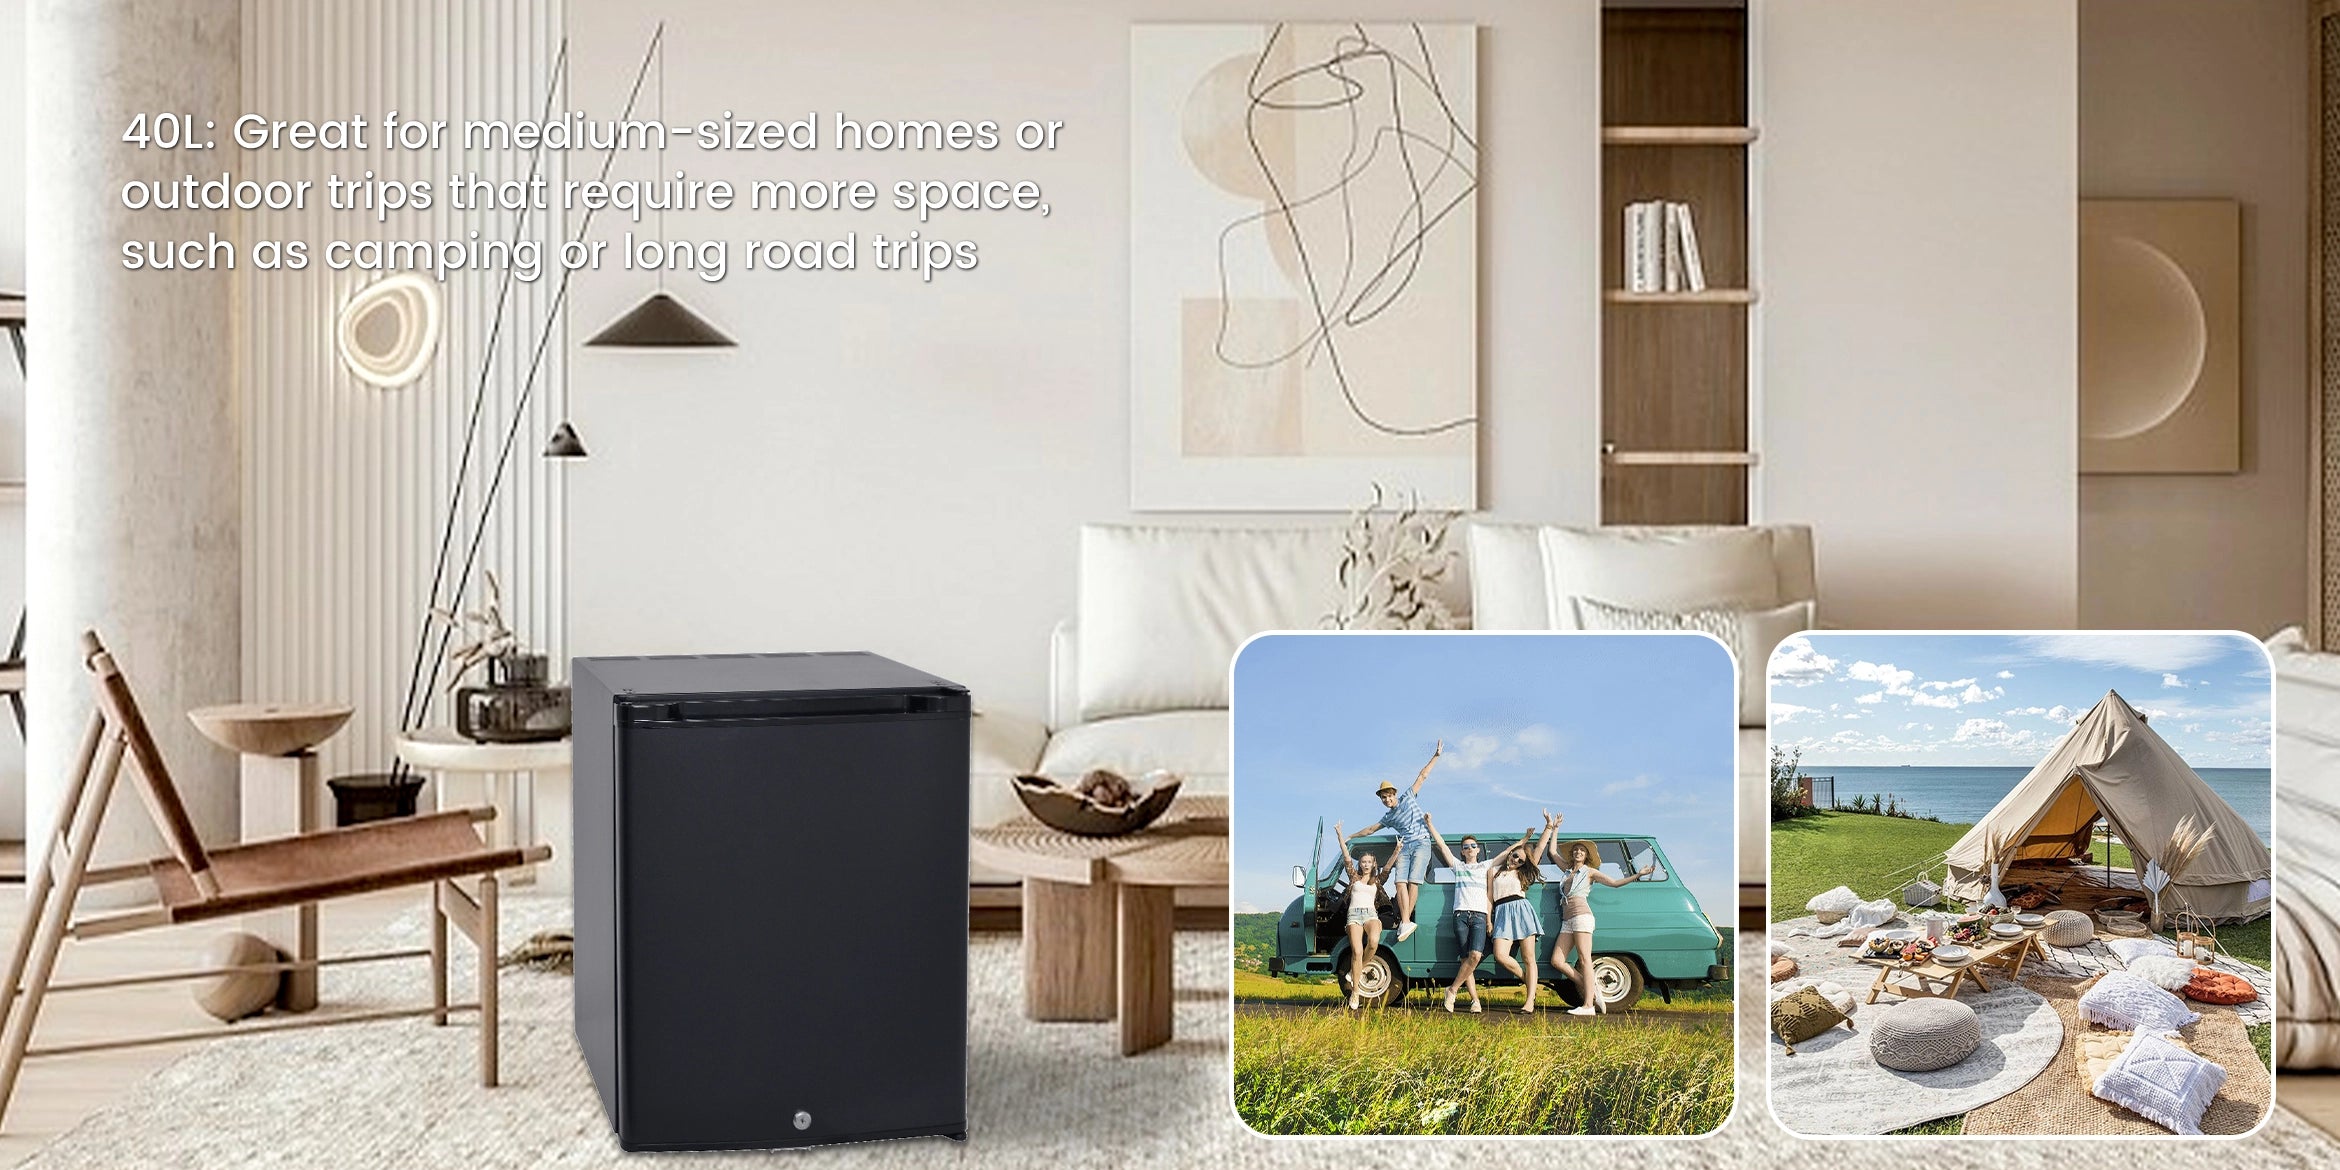 DSX-40LGreat-for-medium-sized-homes-or-outdoor-trips-that-require-more-space,-such-as-camping-or-long-road-trips